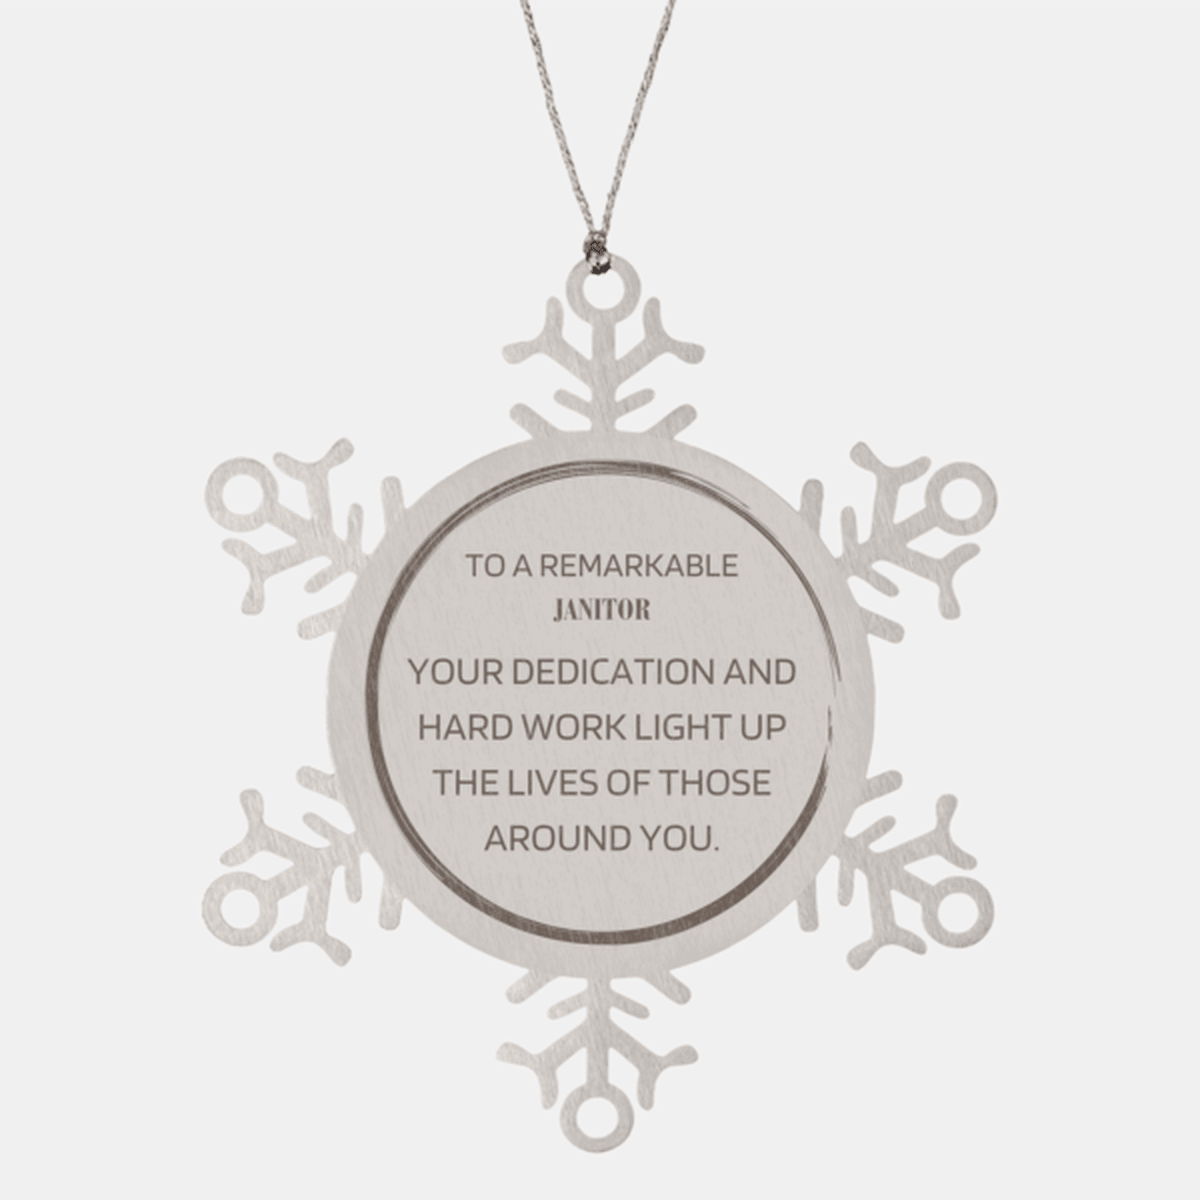 Remarkable Janitor Gifts, Your dedication and hard work, Inspirational Birthday Christmas Unique Snowflake Ornament For Janitor, Coworkers, Men, Women, Friends - Mallard Moon Gift Shop